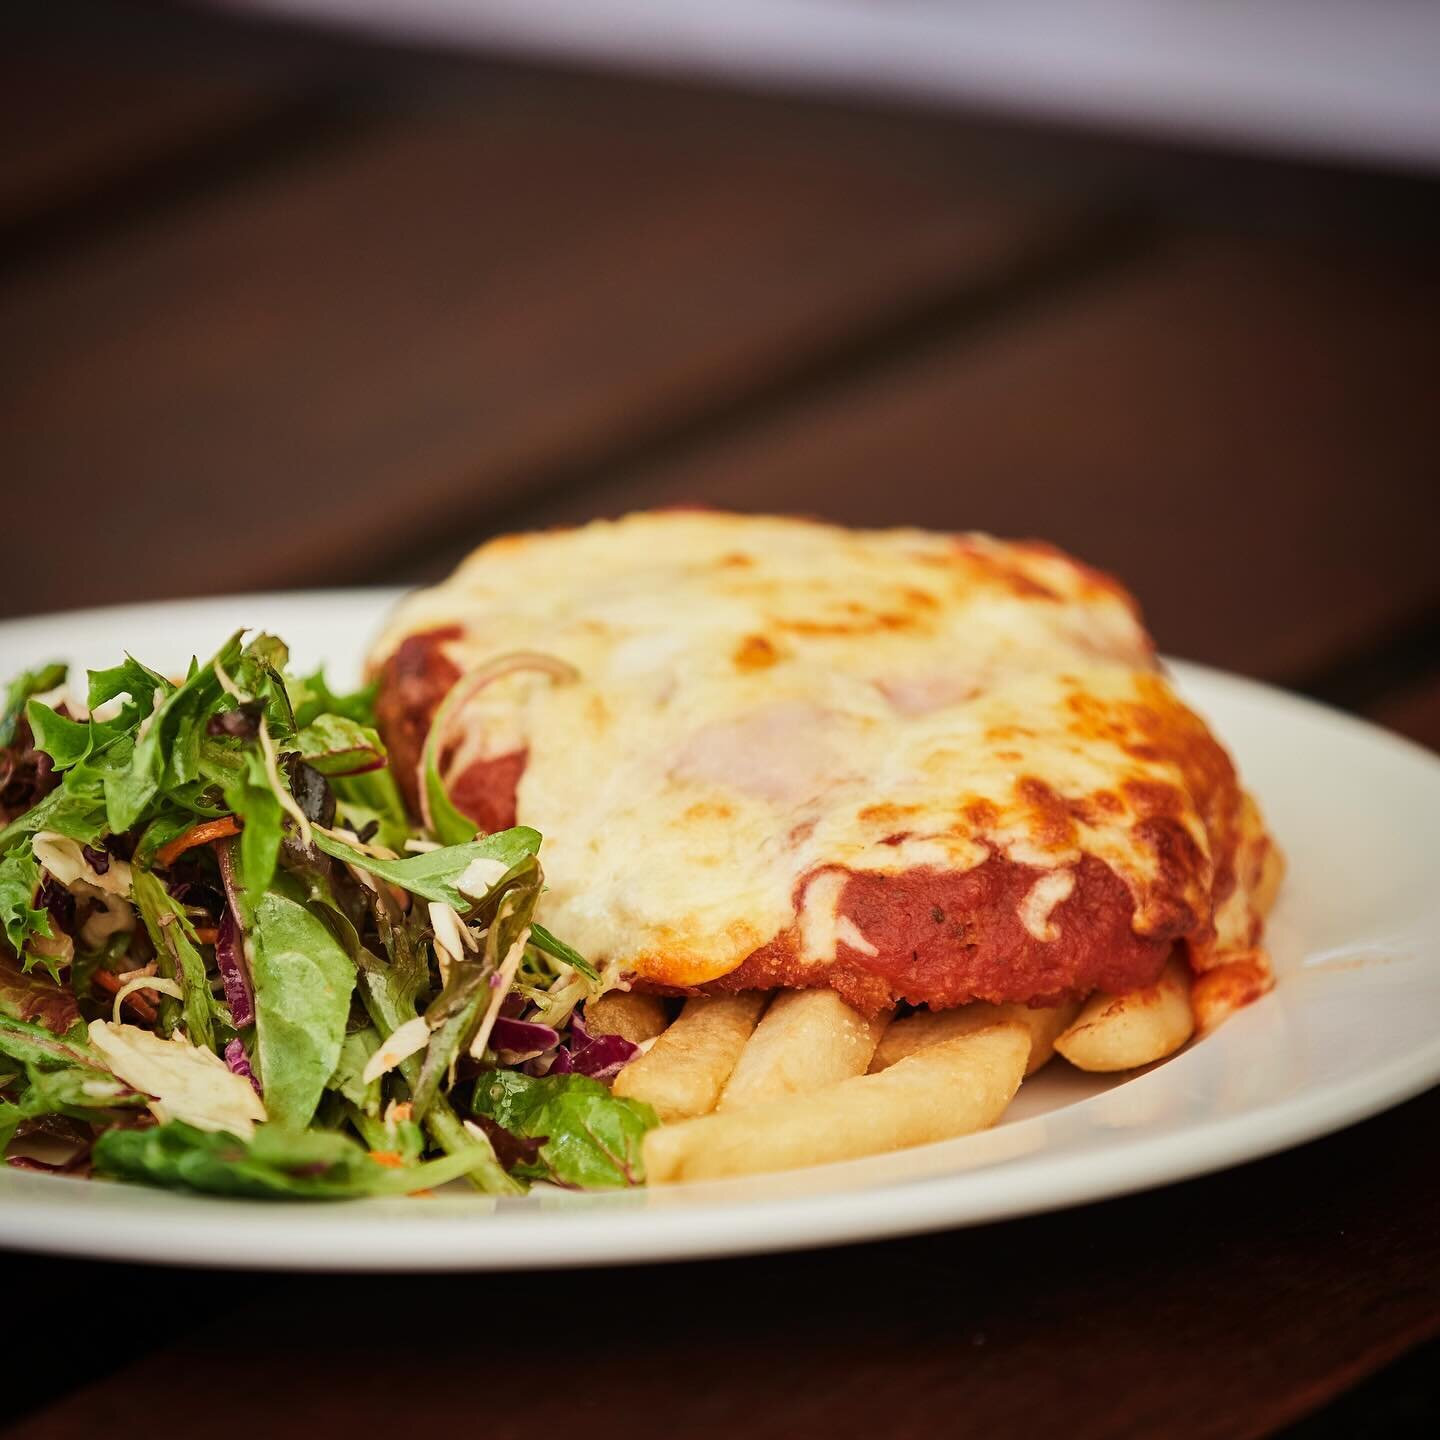 Been a while between parmas? You&rsquo;re in luck because Monday is Parma Day! That means we have specials on our full range of parmas for both lunch and dinner. Go on, you know you want to&hellip;